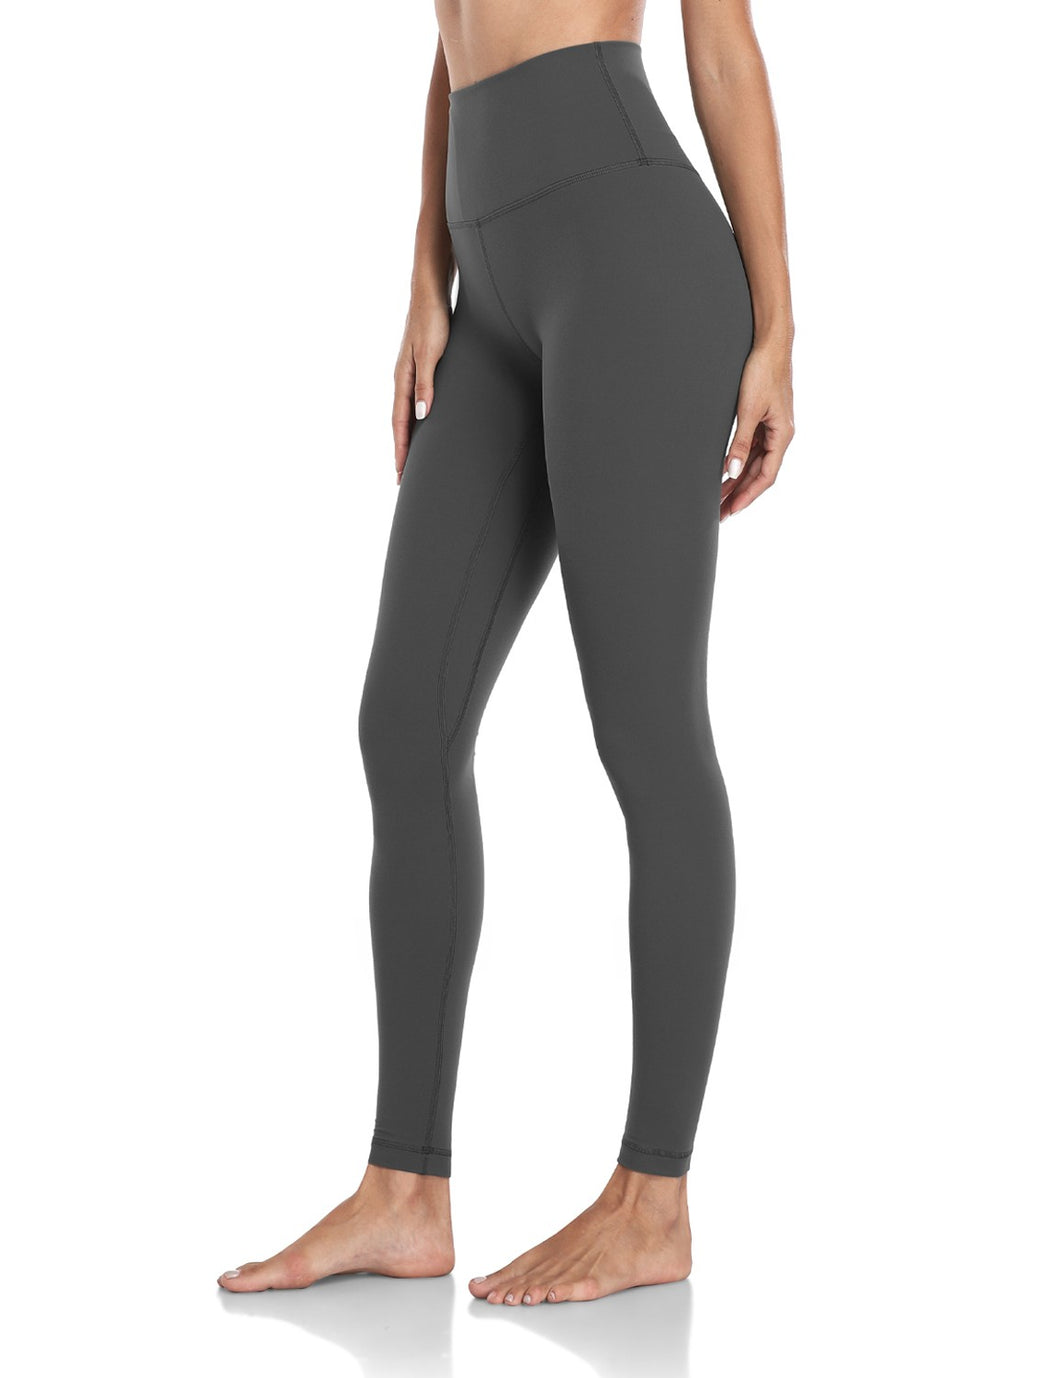 HeyNuts Essential/Workout Pro/Yoga Pro 7/8 Leggings with Pockets